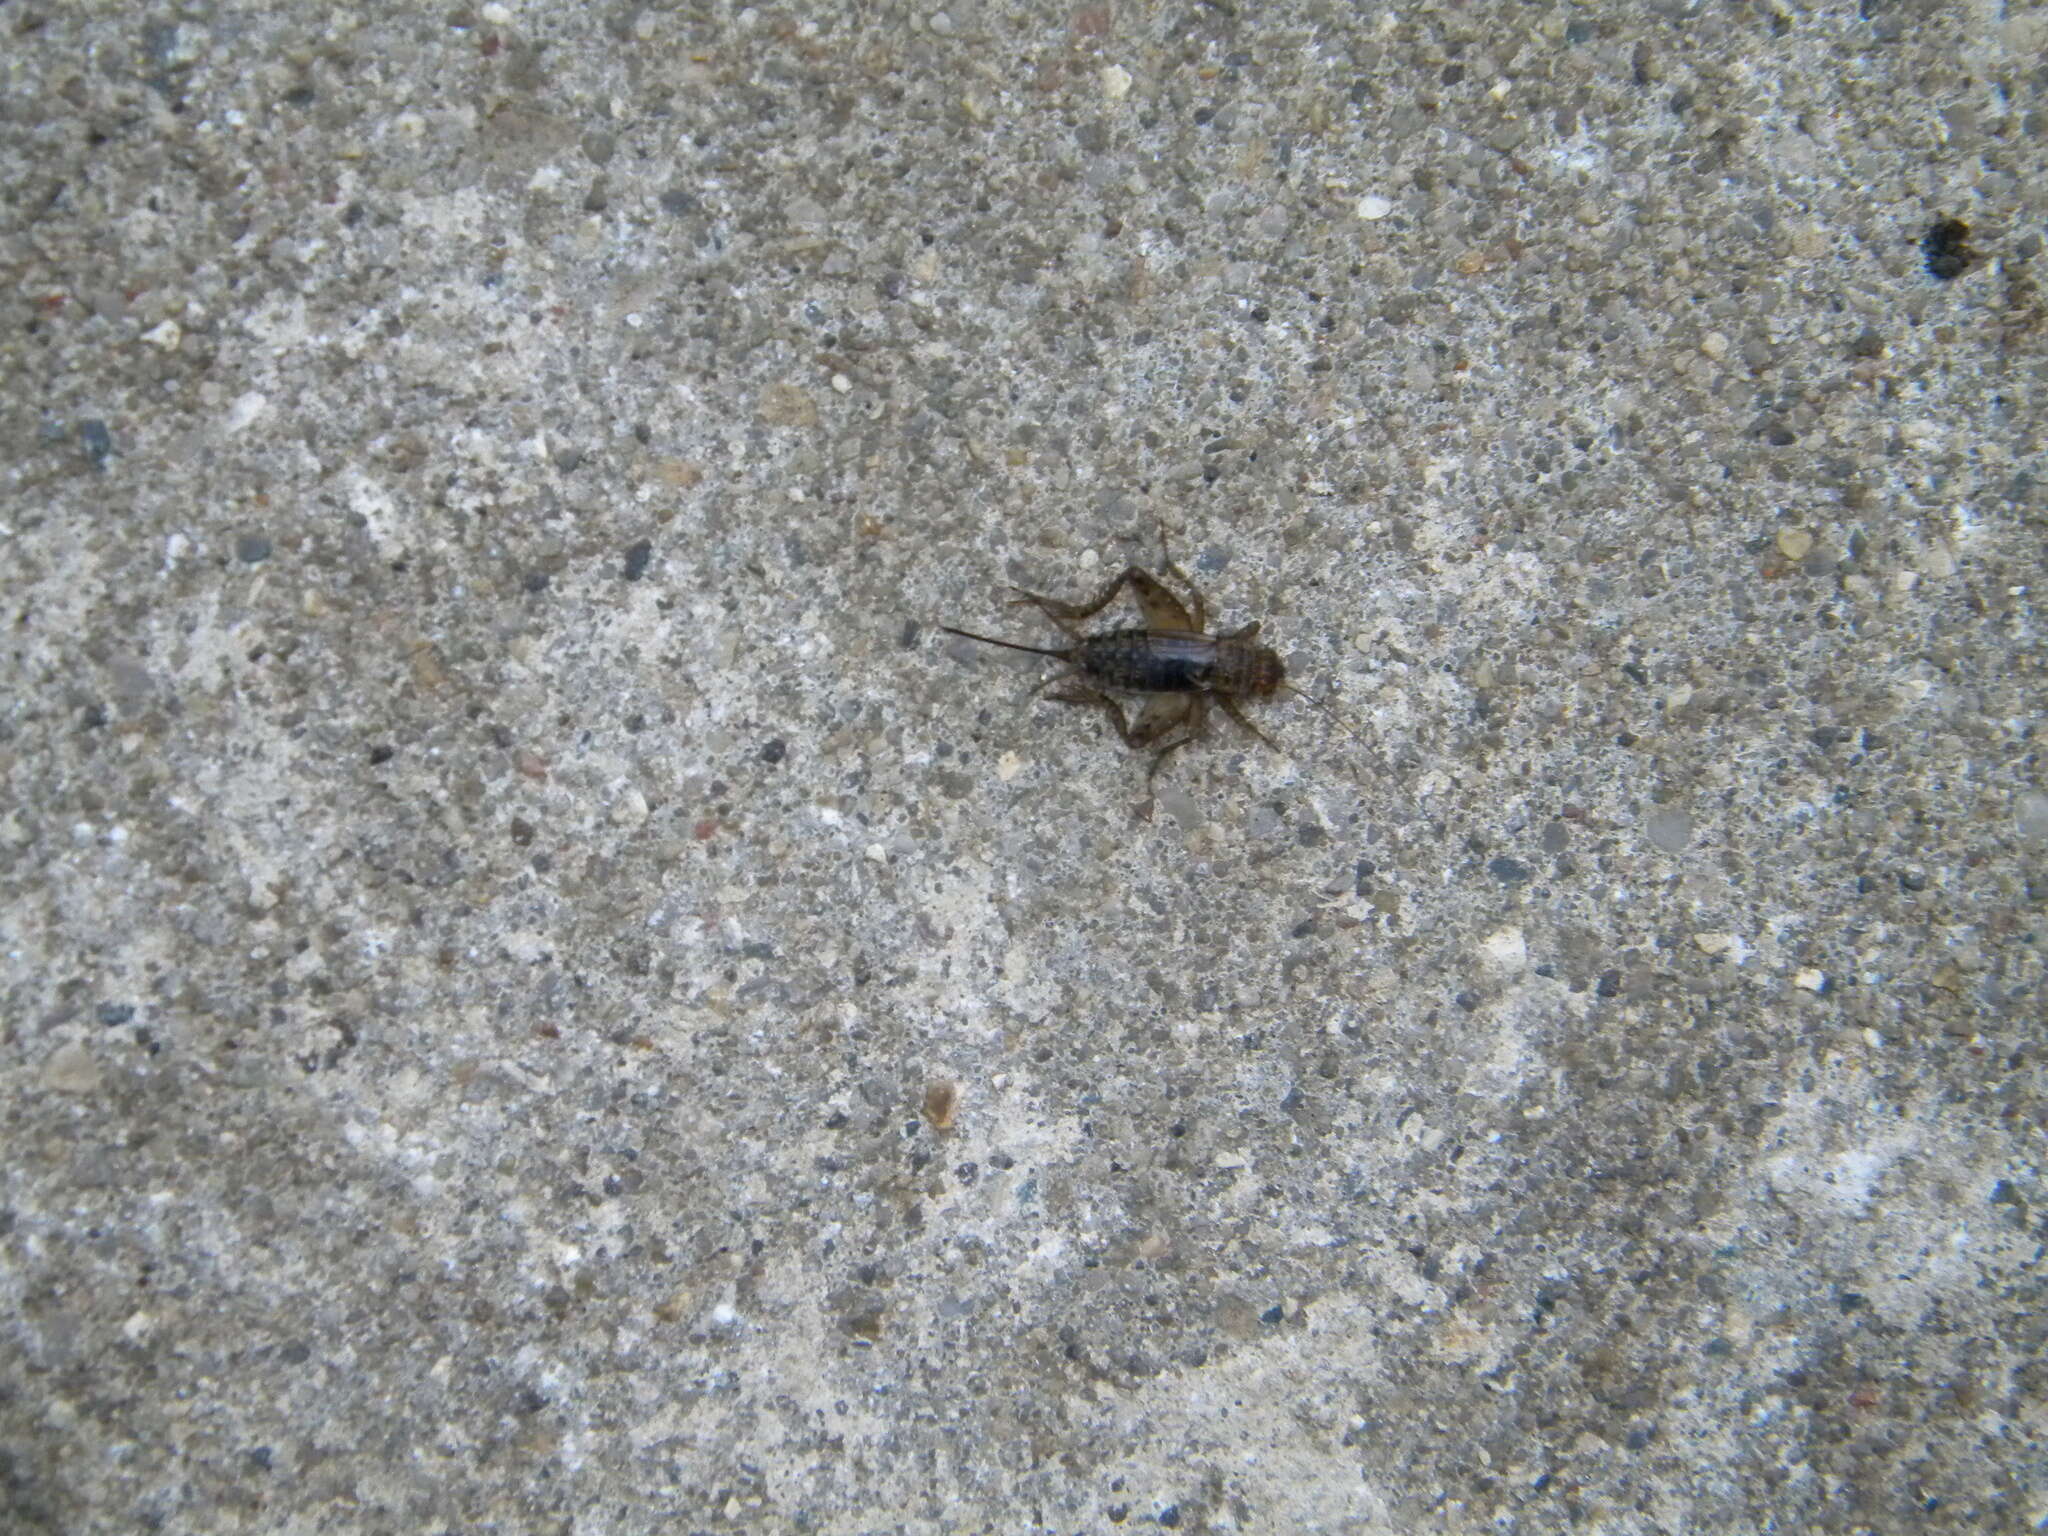 Image of Striped Ground Cricket